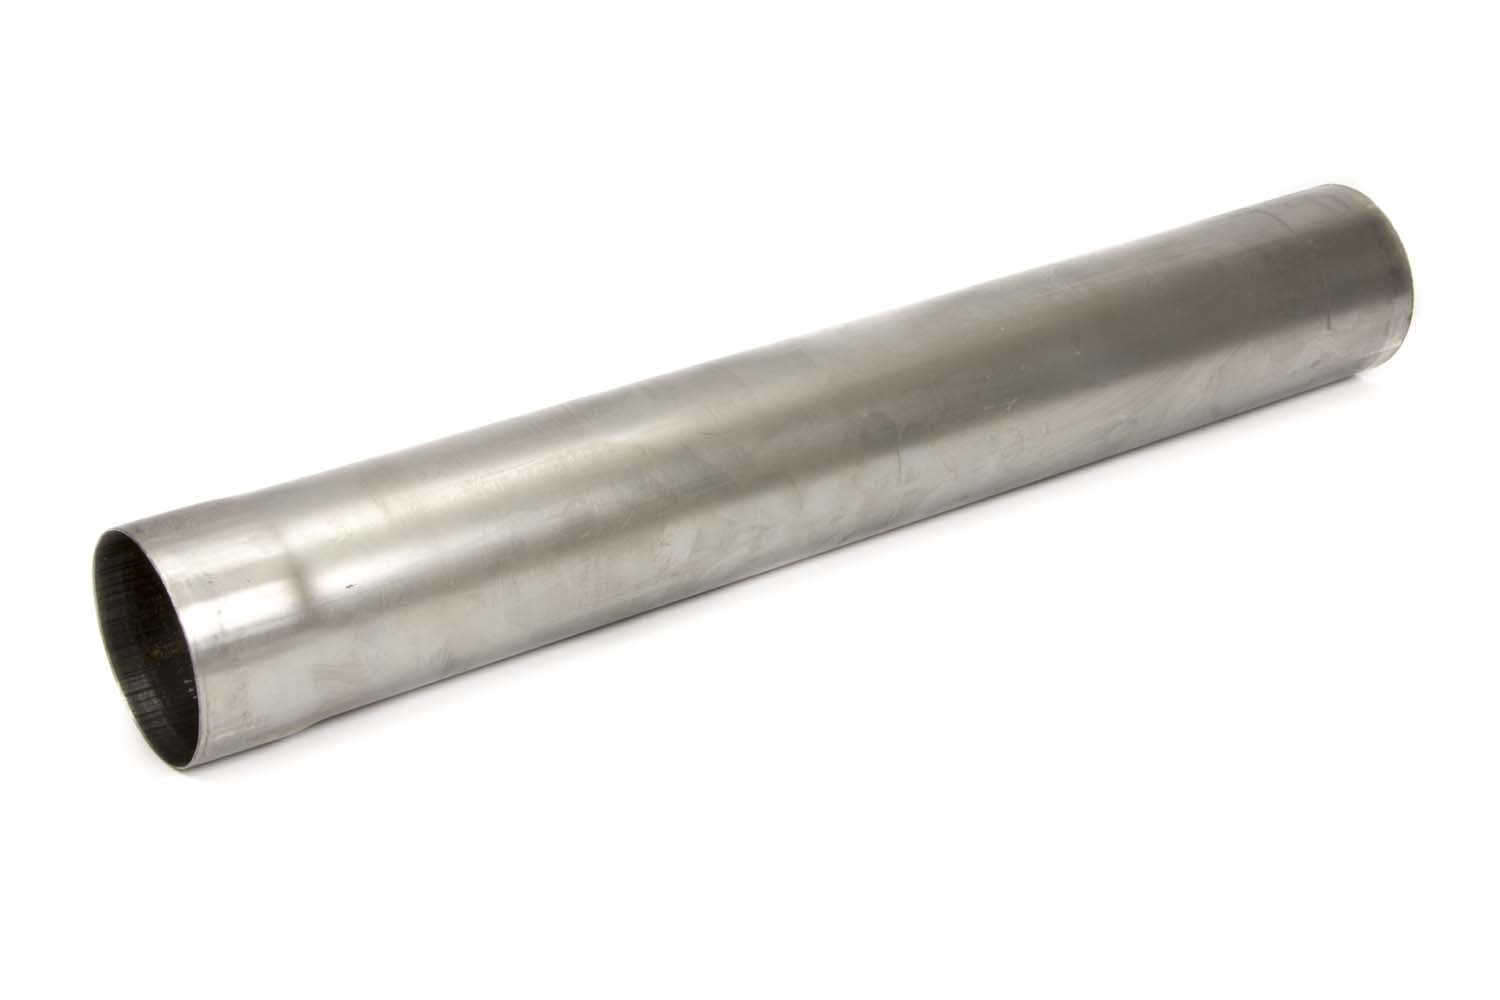 Schoenfeld Headers 240040 Exhaust Pipe Extension, Straight, 4 in Diameter, 2 ft Long, 1 End Expanded, Steel, Natural, Each